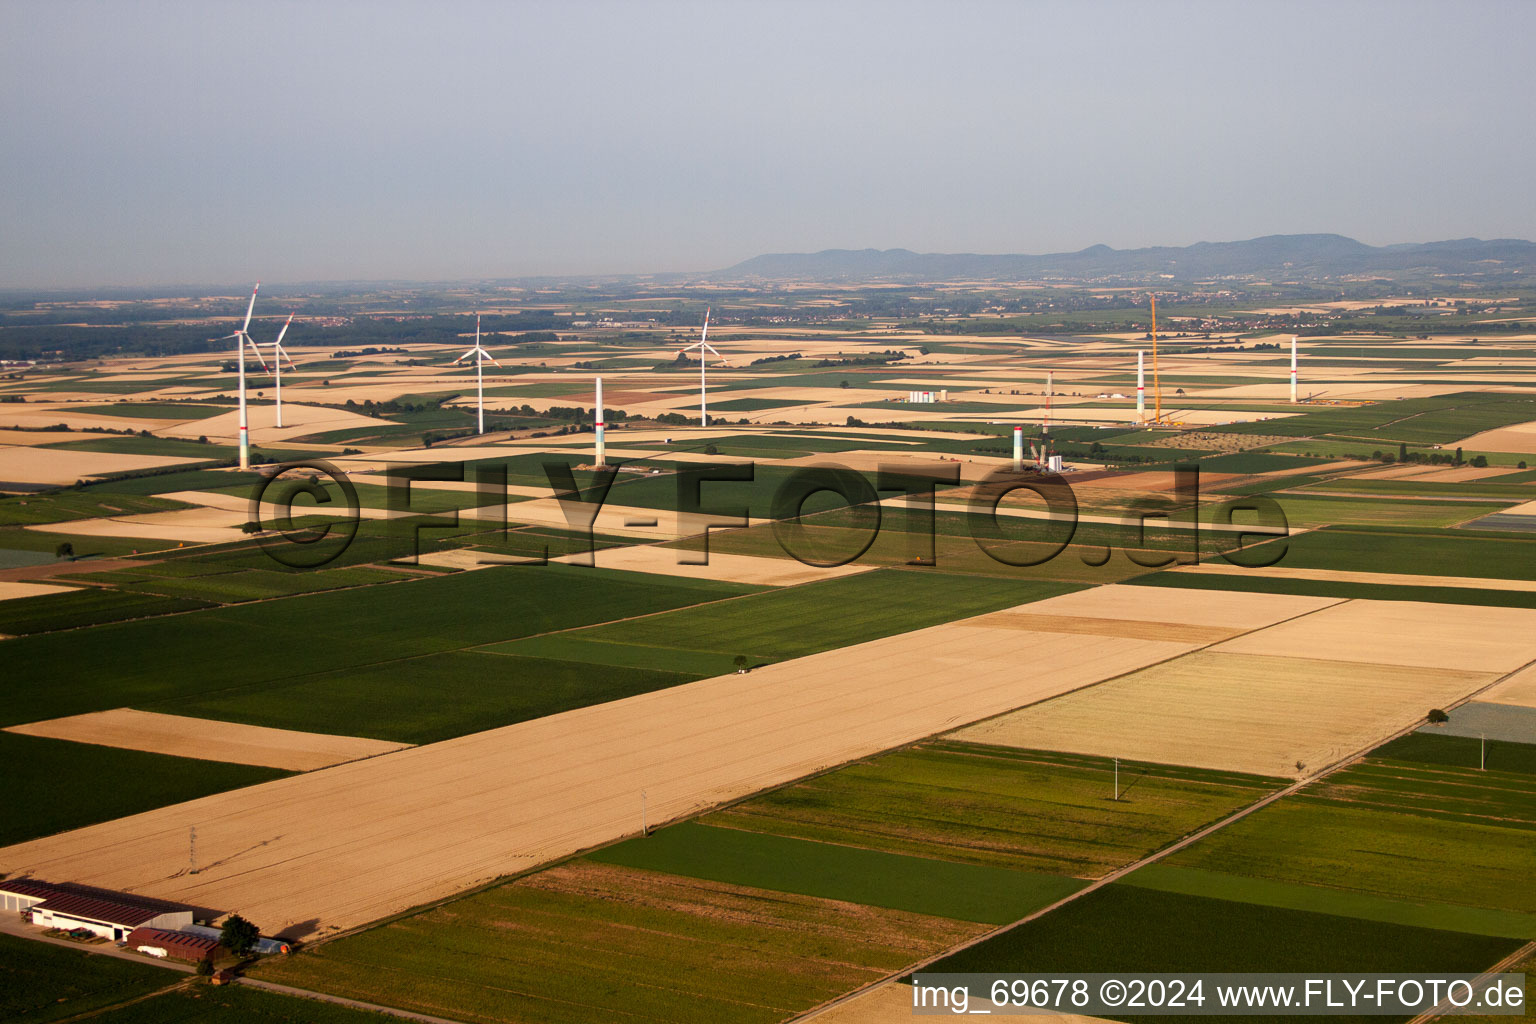 Wind farm construction in Offenbach an der Queich in the state Rhineland-Palatinate, Germany